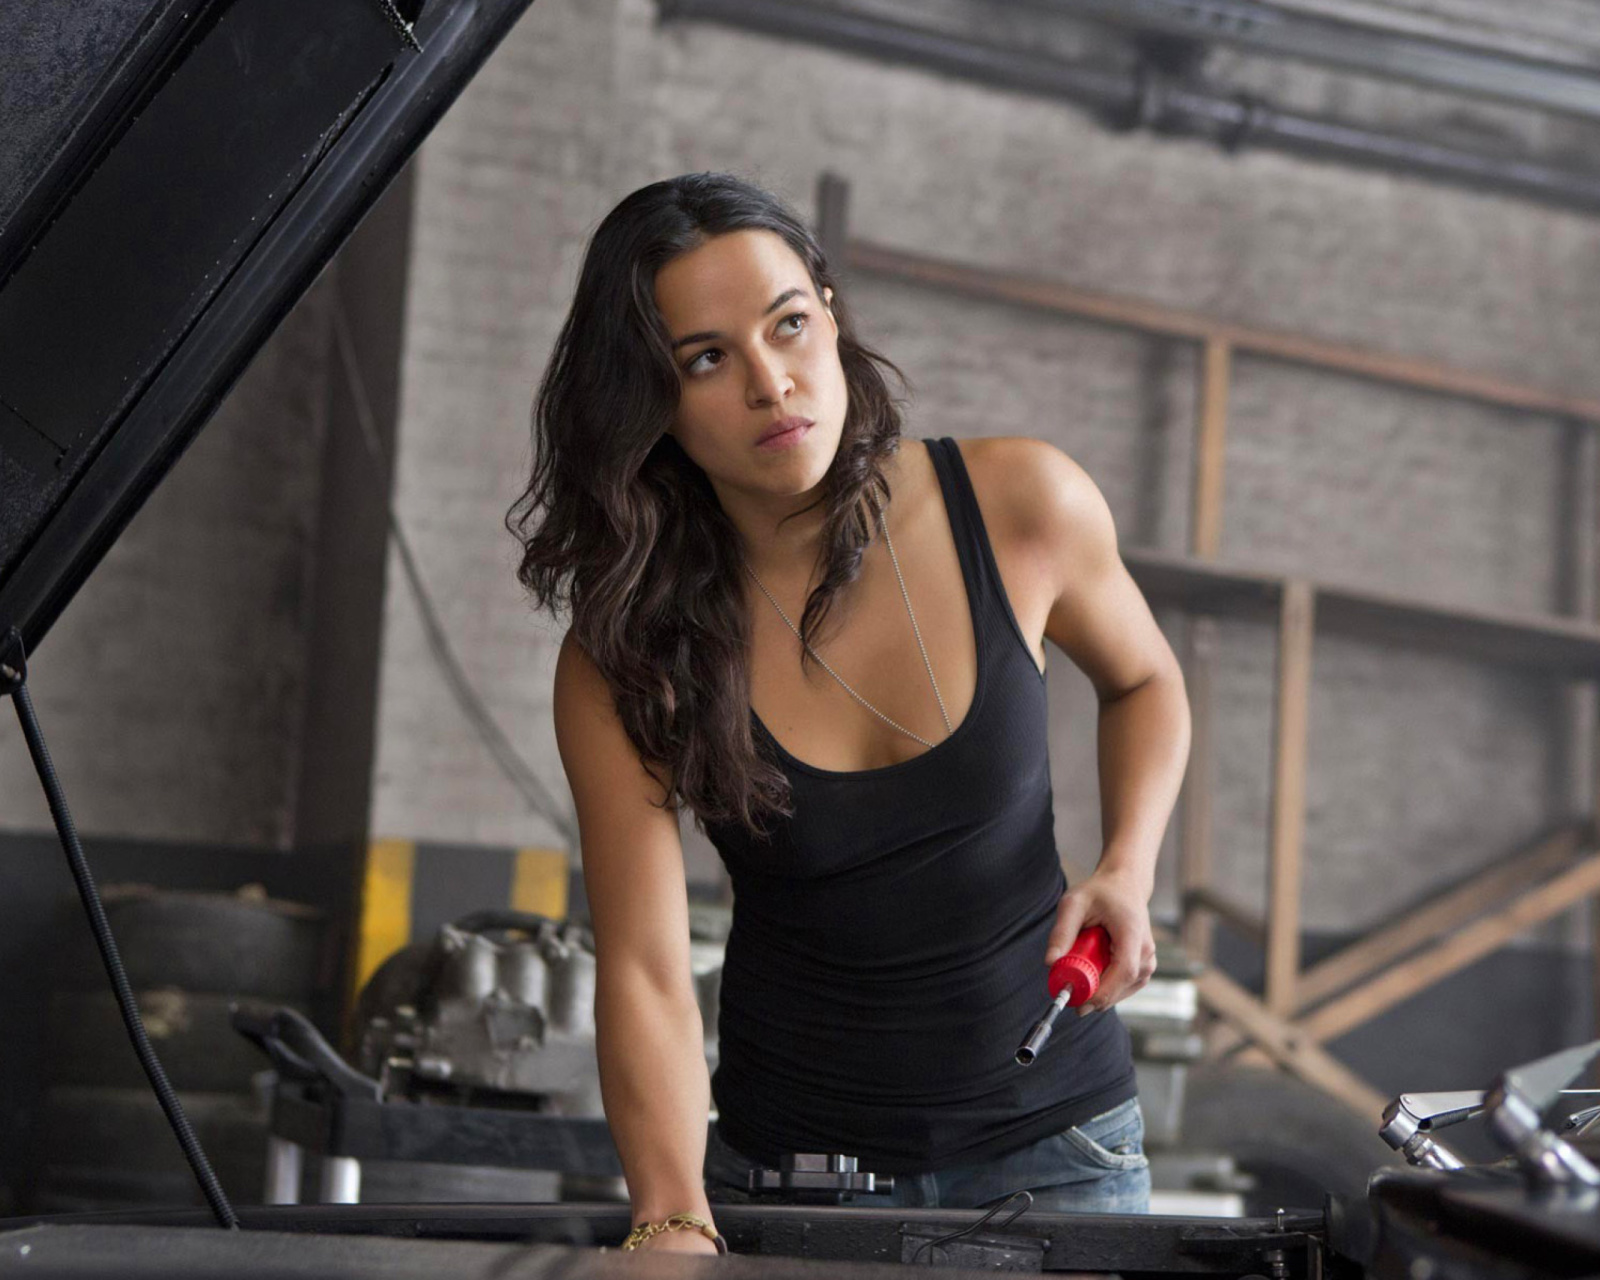 Fast and Furious 6 Letty Ortiz wallpaper 1600x1280